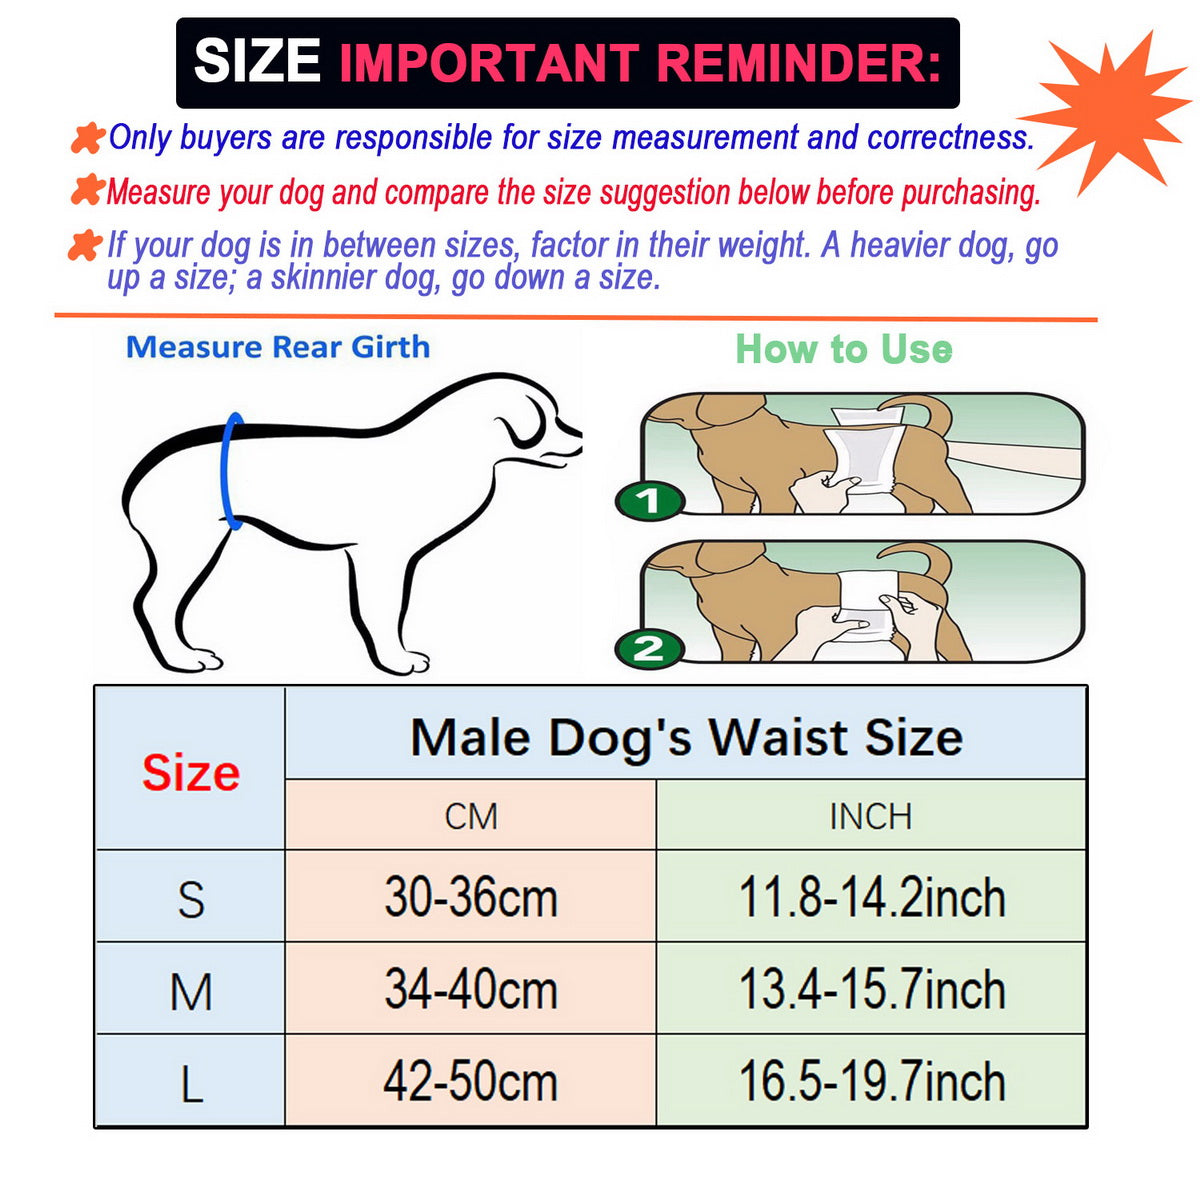 Reusable Washable Male Dog Diapers, Dog Wrap Pants Puppy Diaper Pet Dog Panty  Underwear (China Factory Direct)